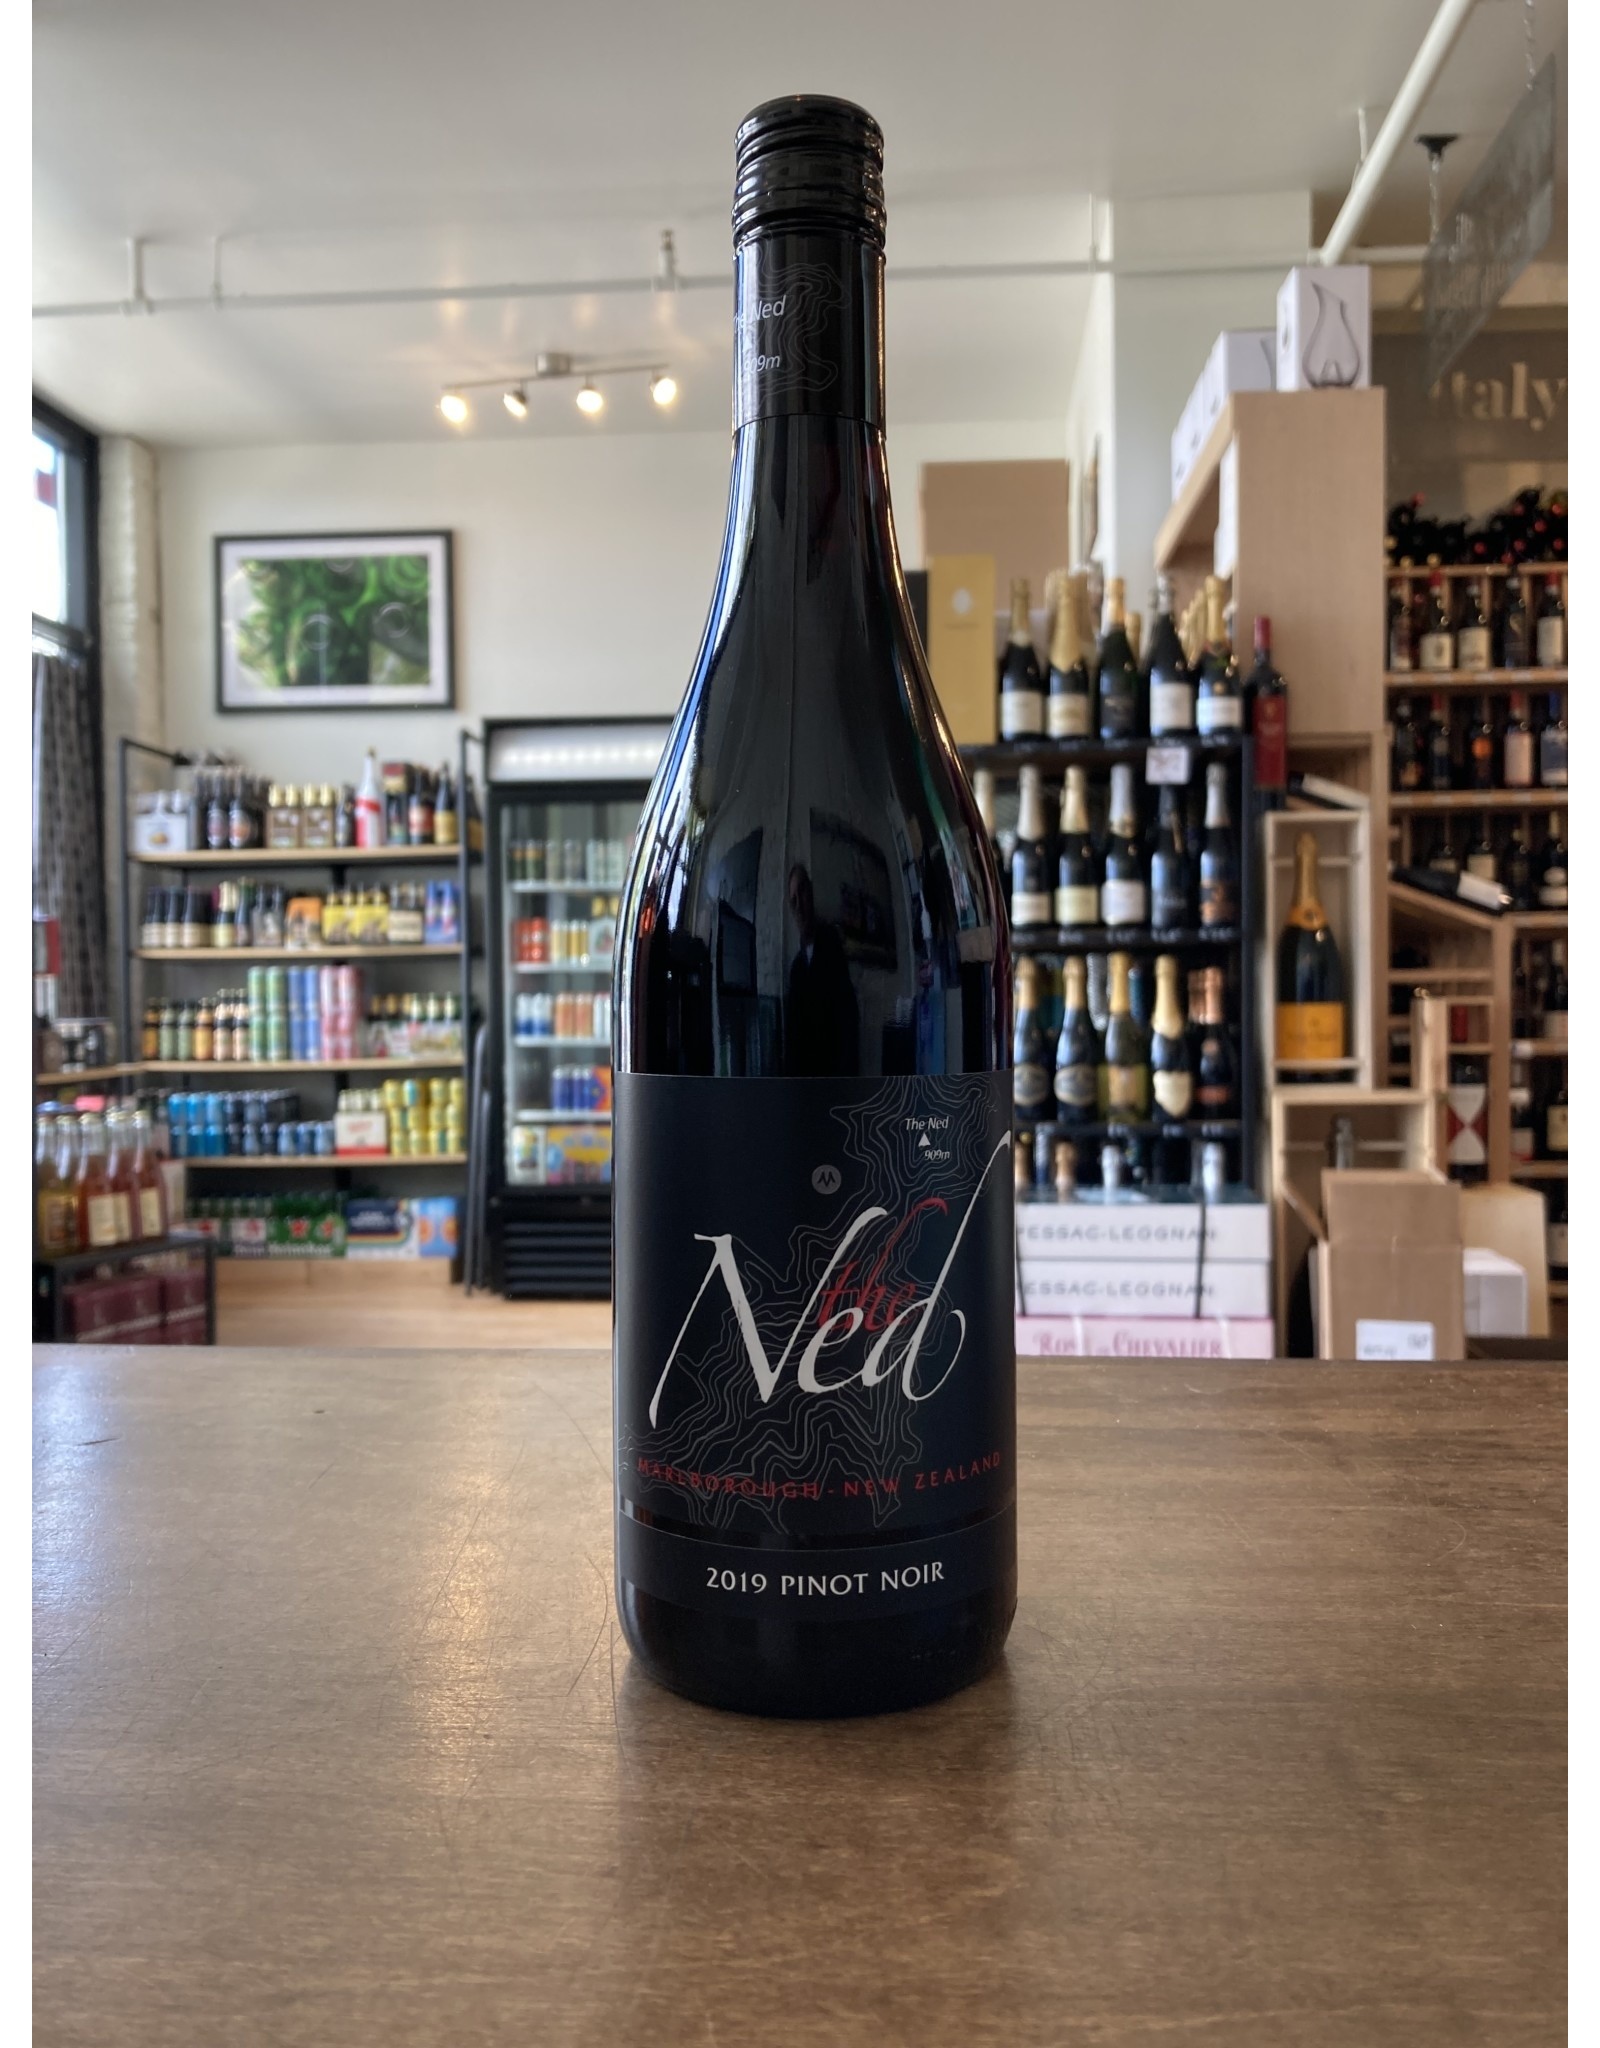 The Ned The Ned Pinot Noir 2019